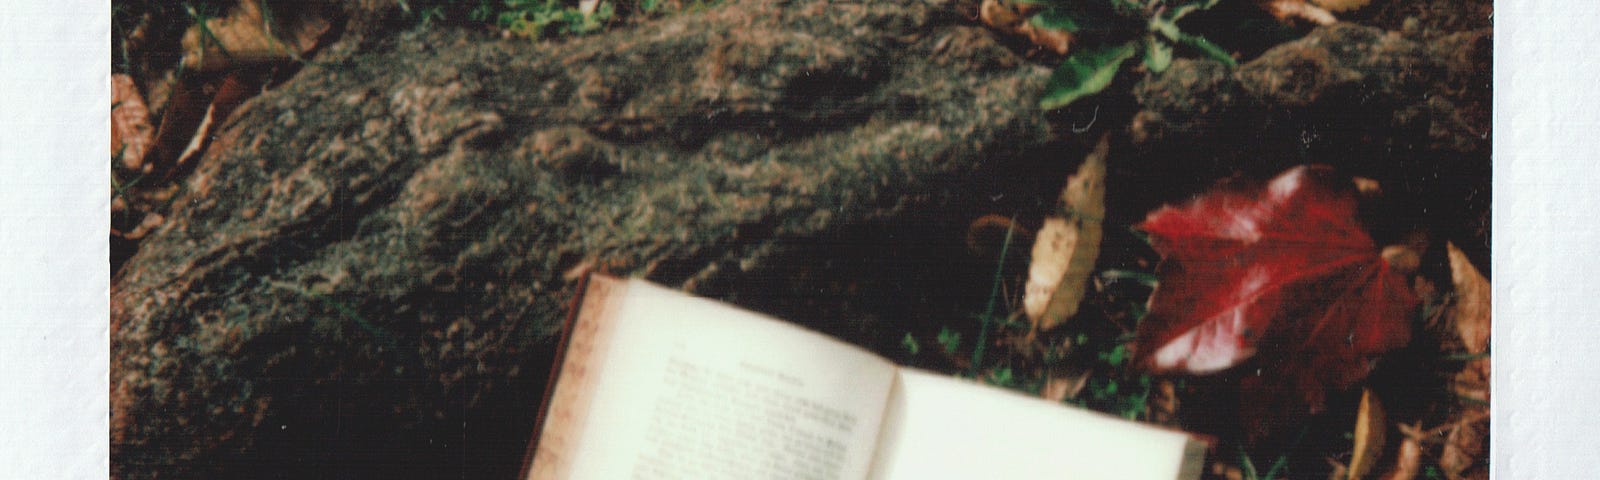 A book in the woods.